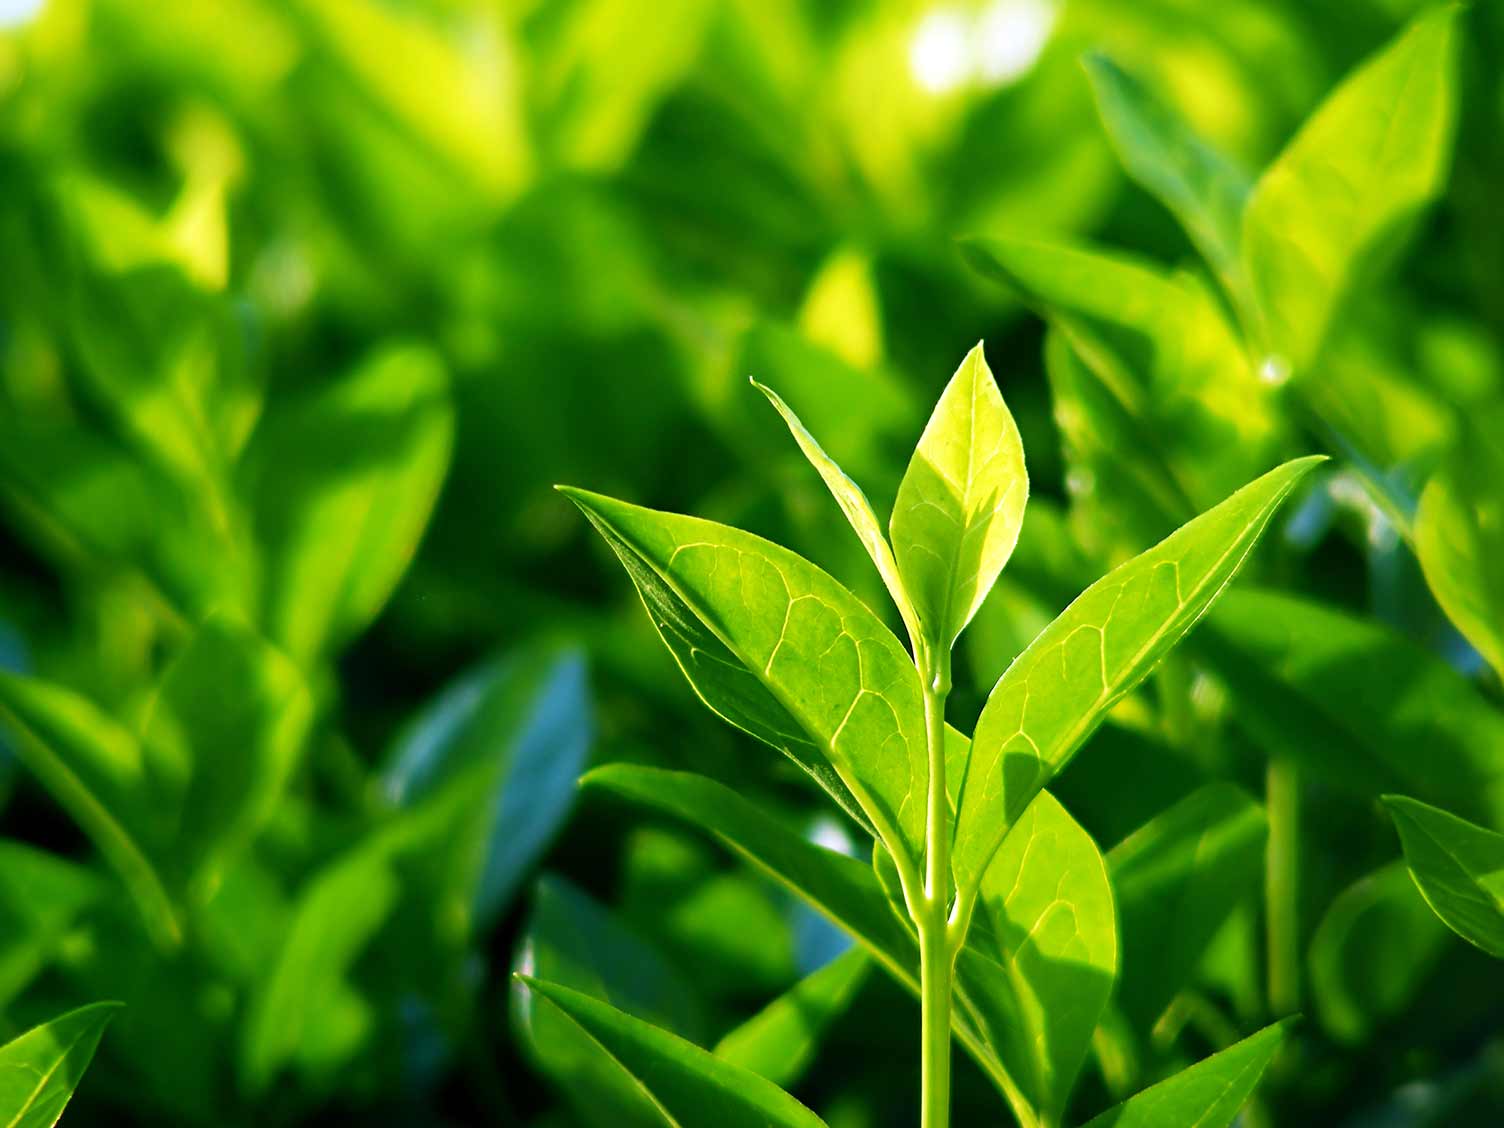 Vibrant young tea leaves basking in sunlight, highlighting fresh growth.